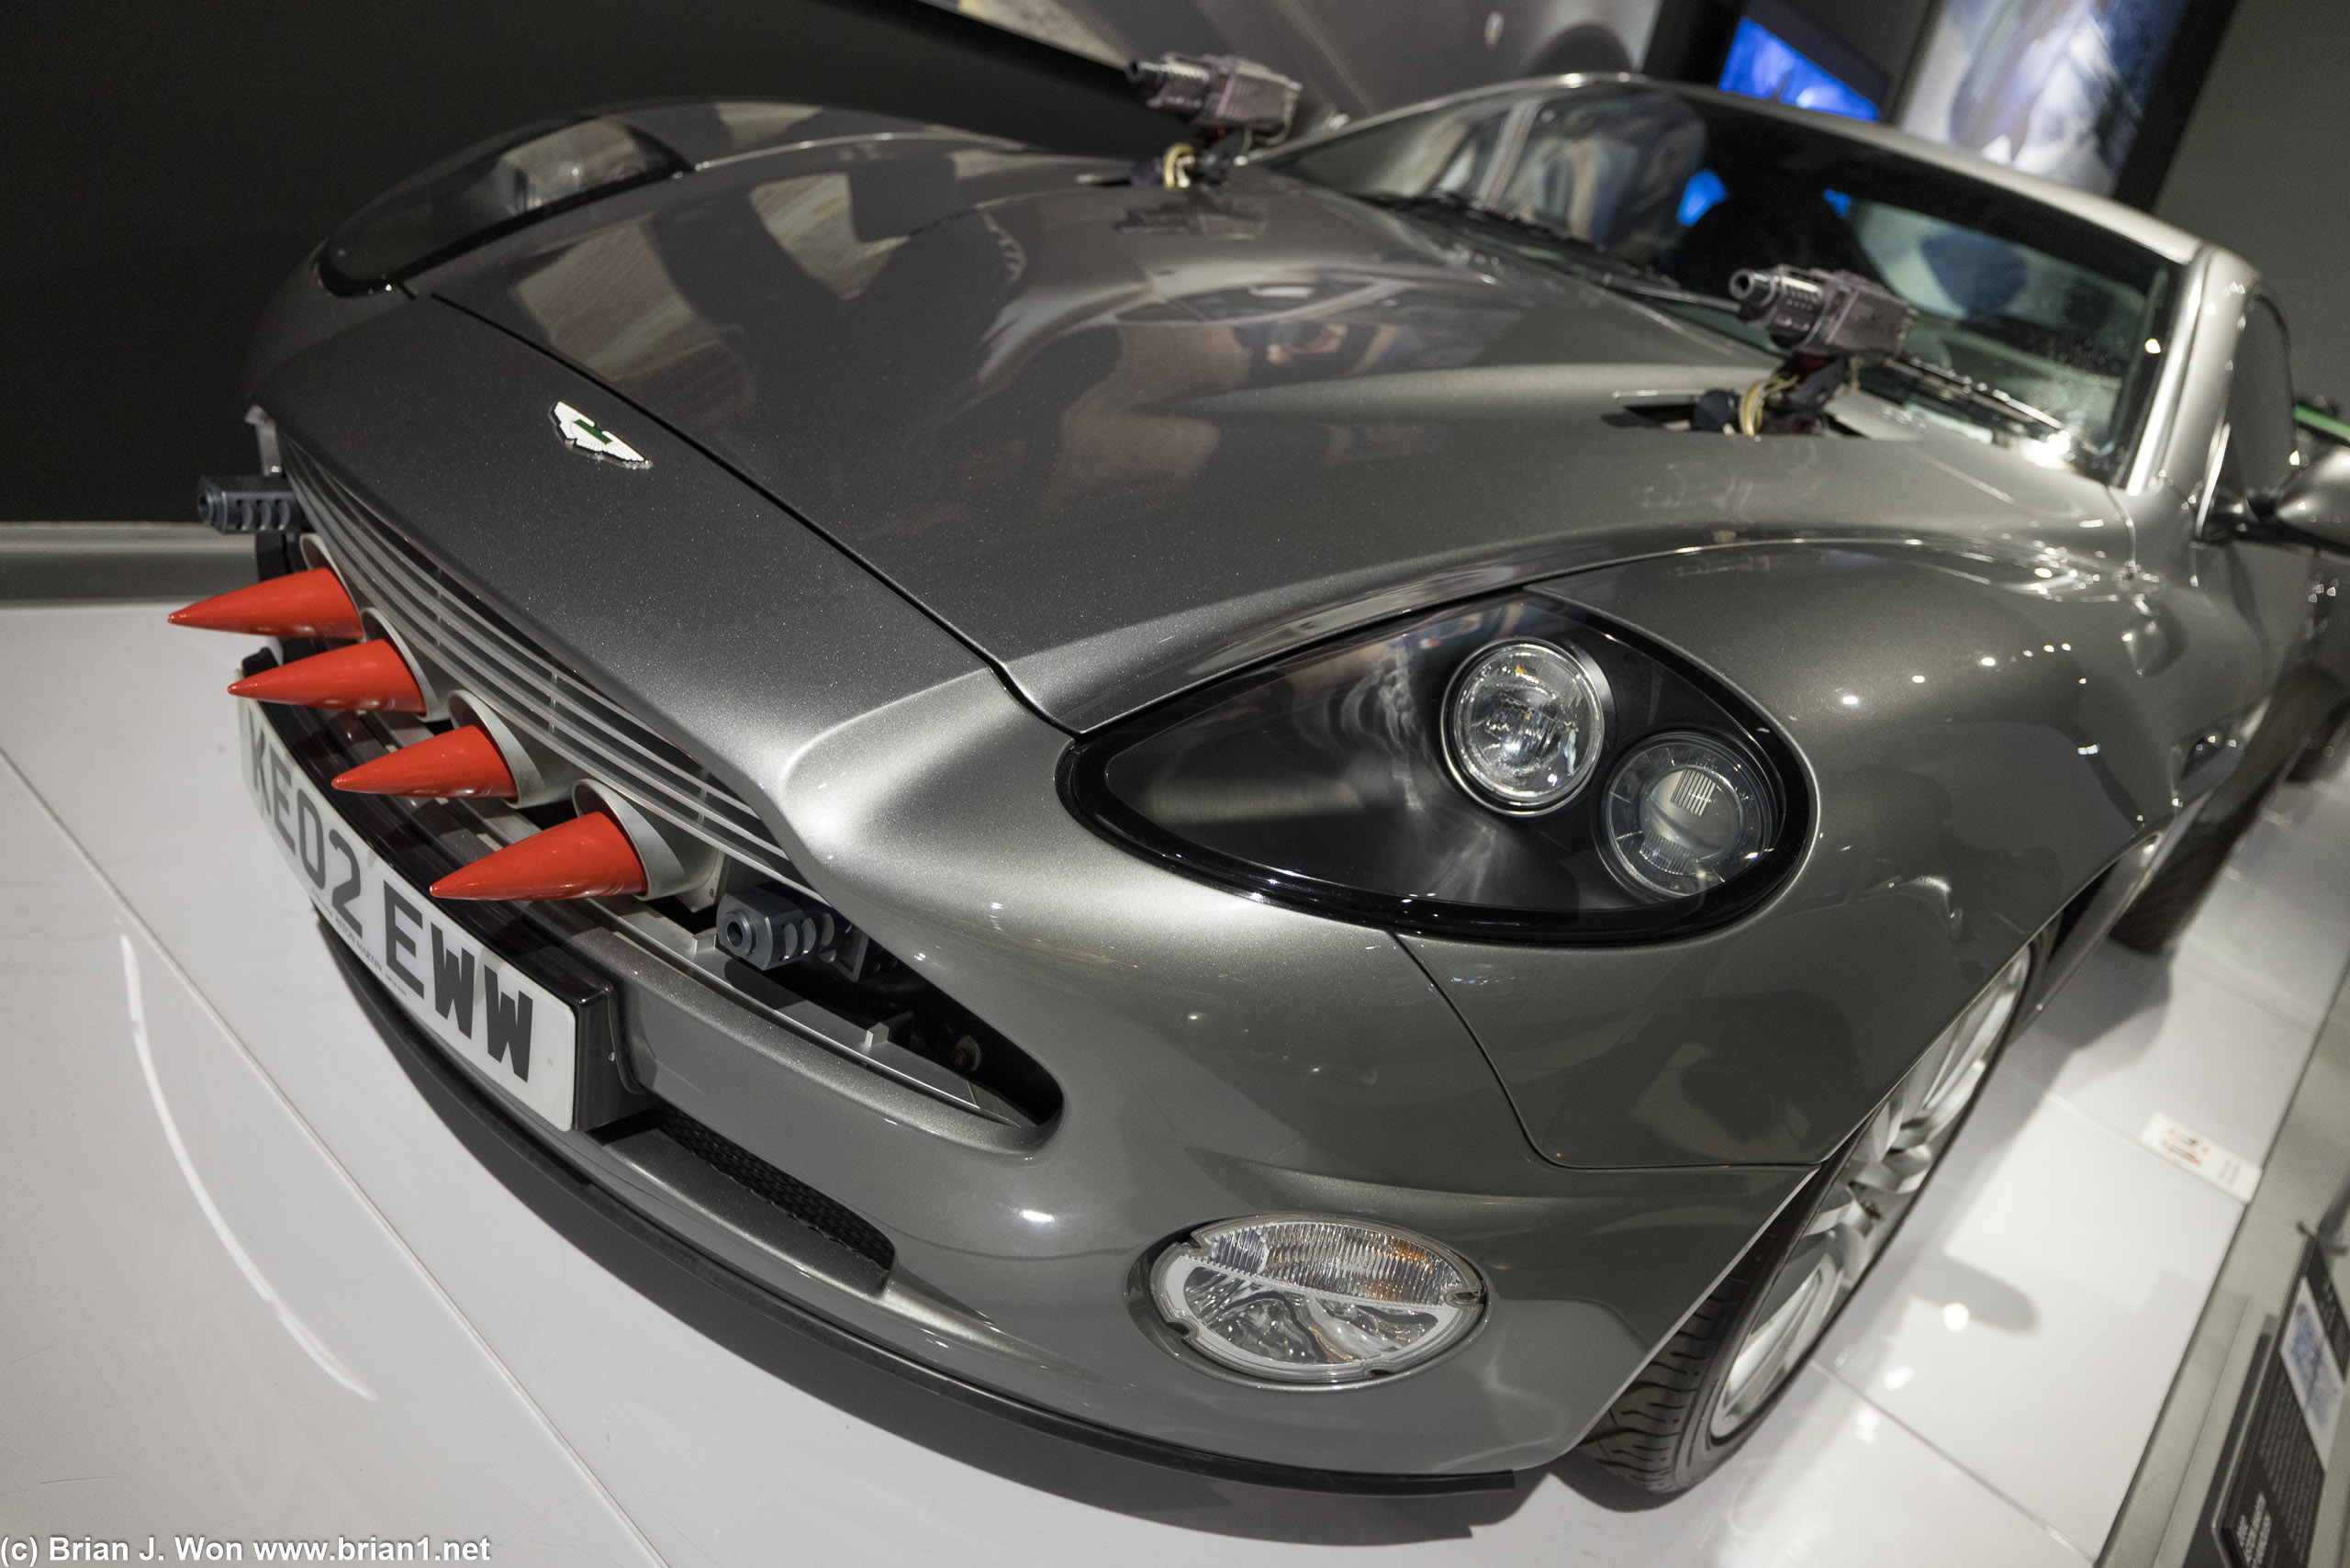 2002 Aston Martin V12 Vanquish from Die Another Day.